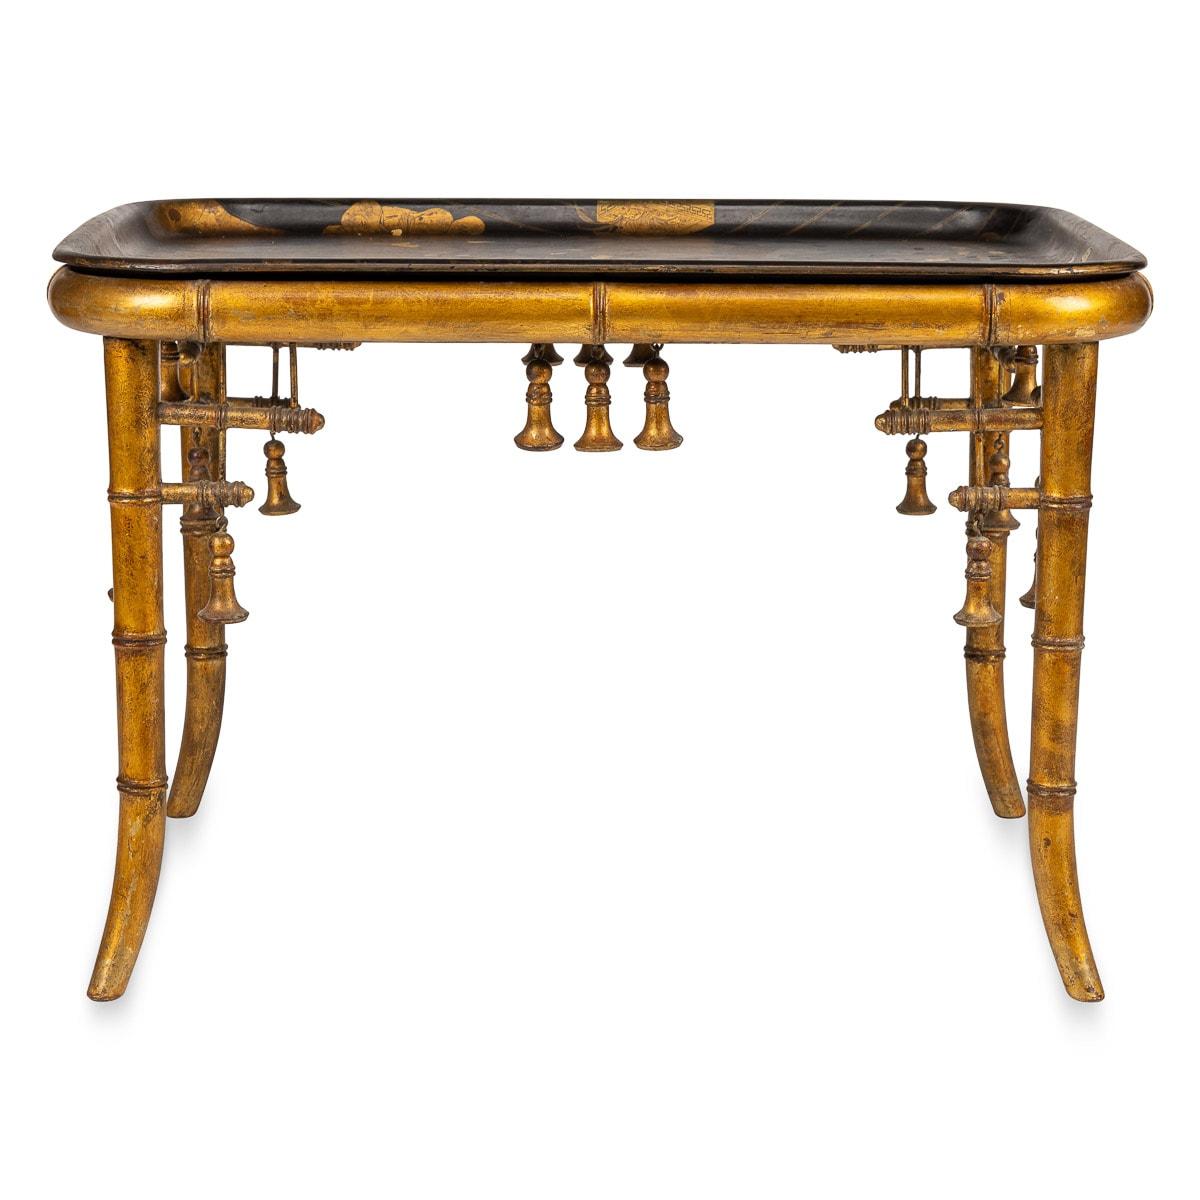 20th Century French Giltwood & Japanese Style Lacquer Table with Tray, C.1880 For Sale 1